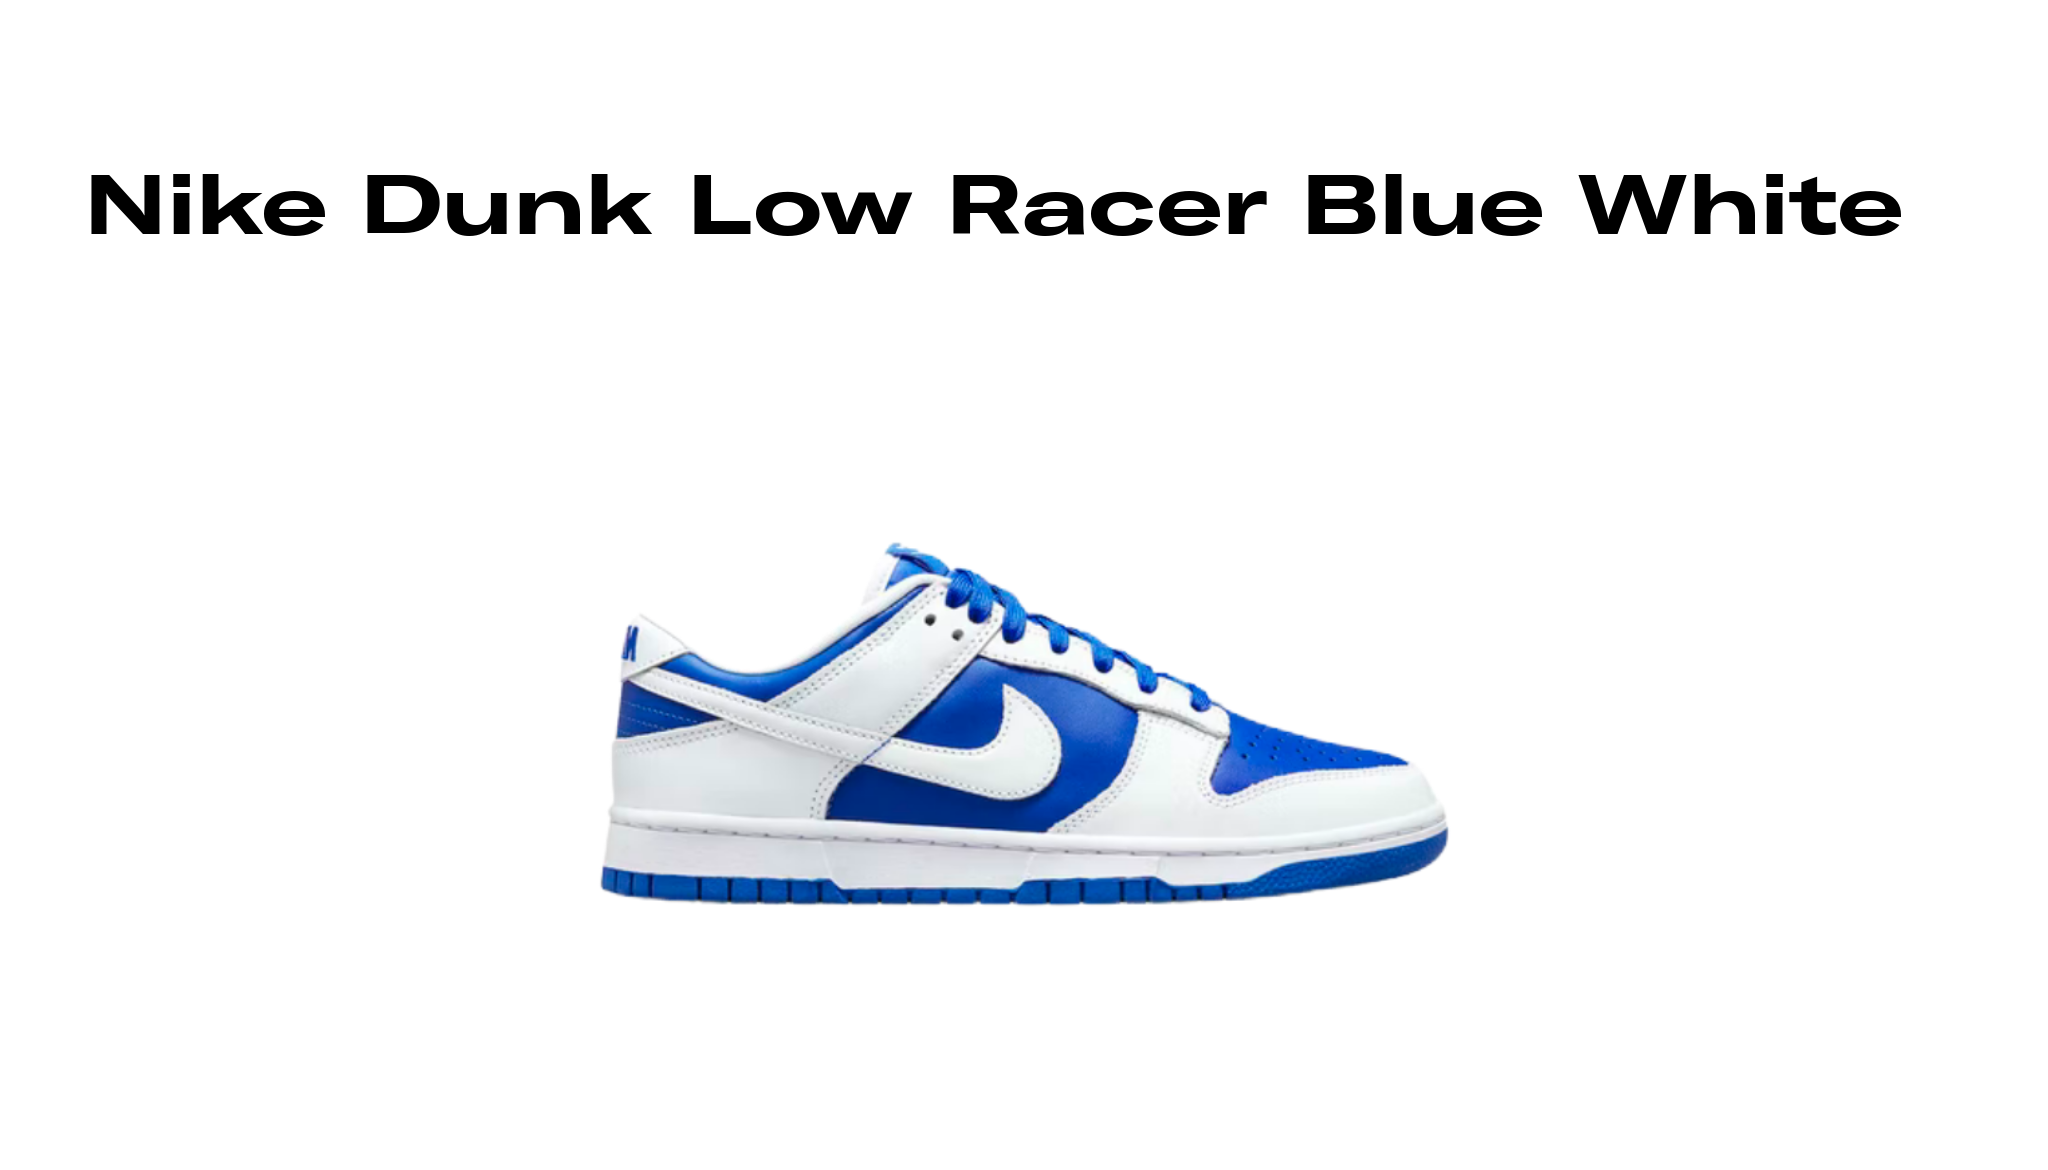 Nike Dunk Low Racer Blue White, Raffles and Release Date | Sole 